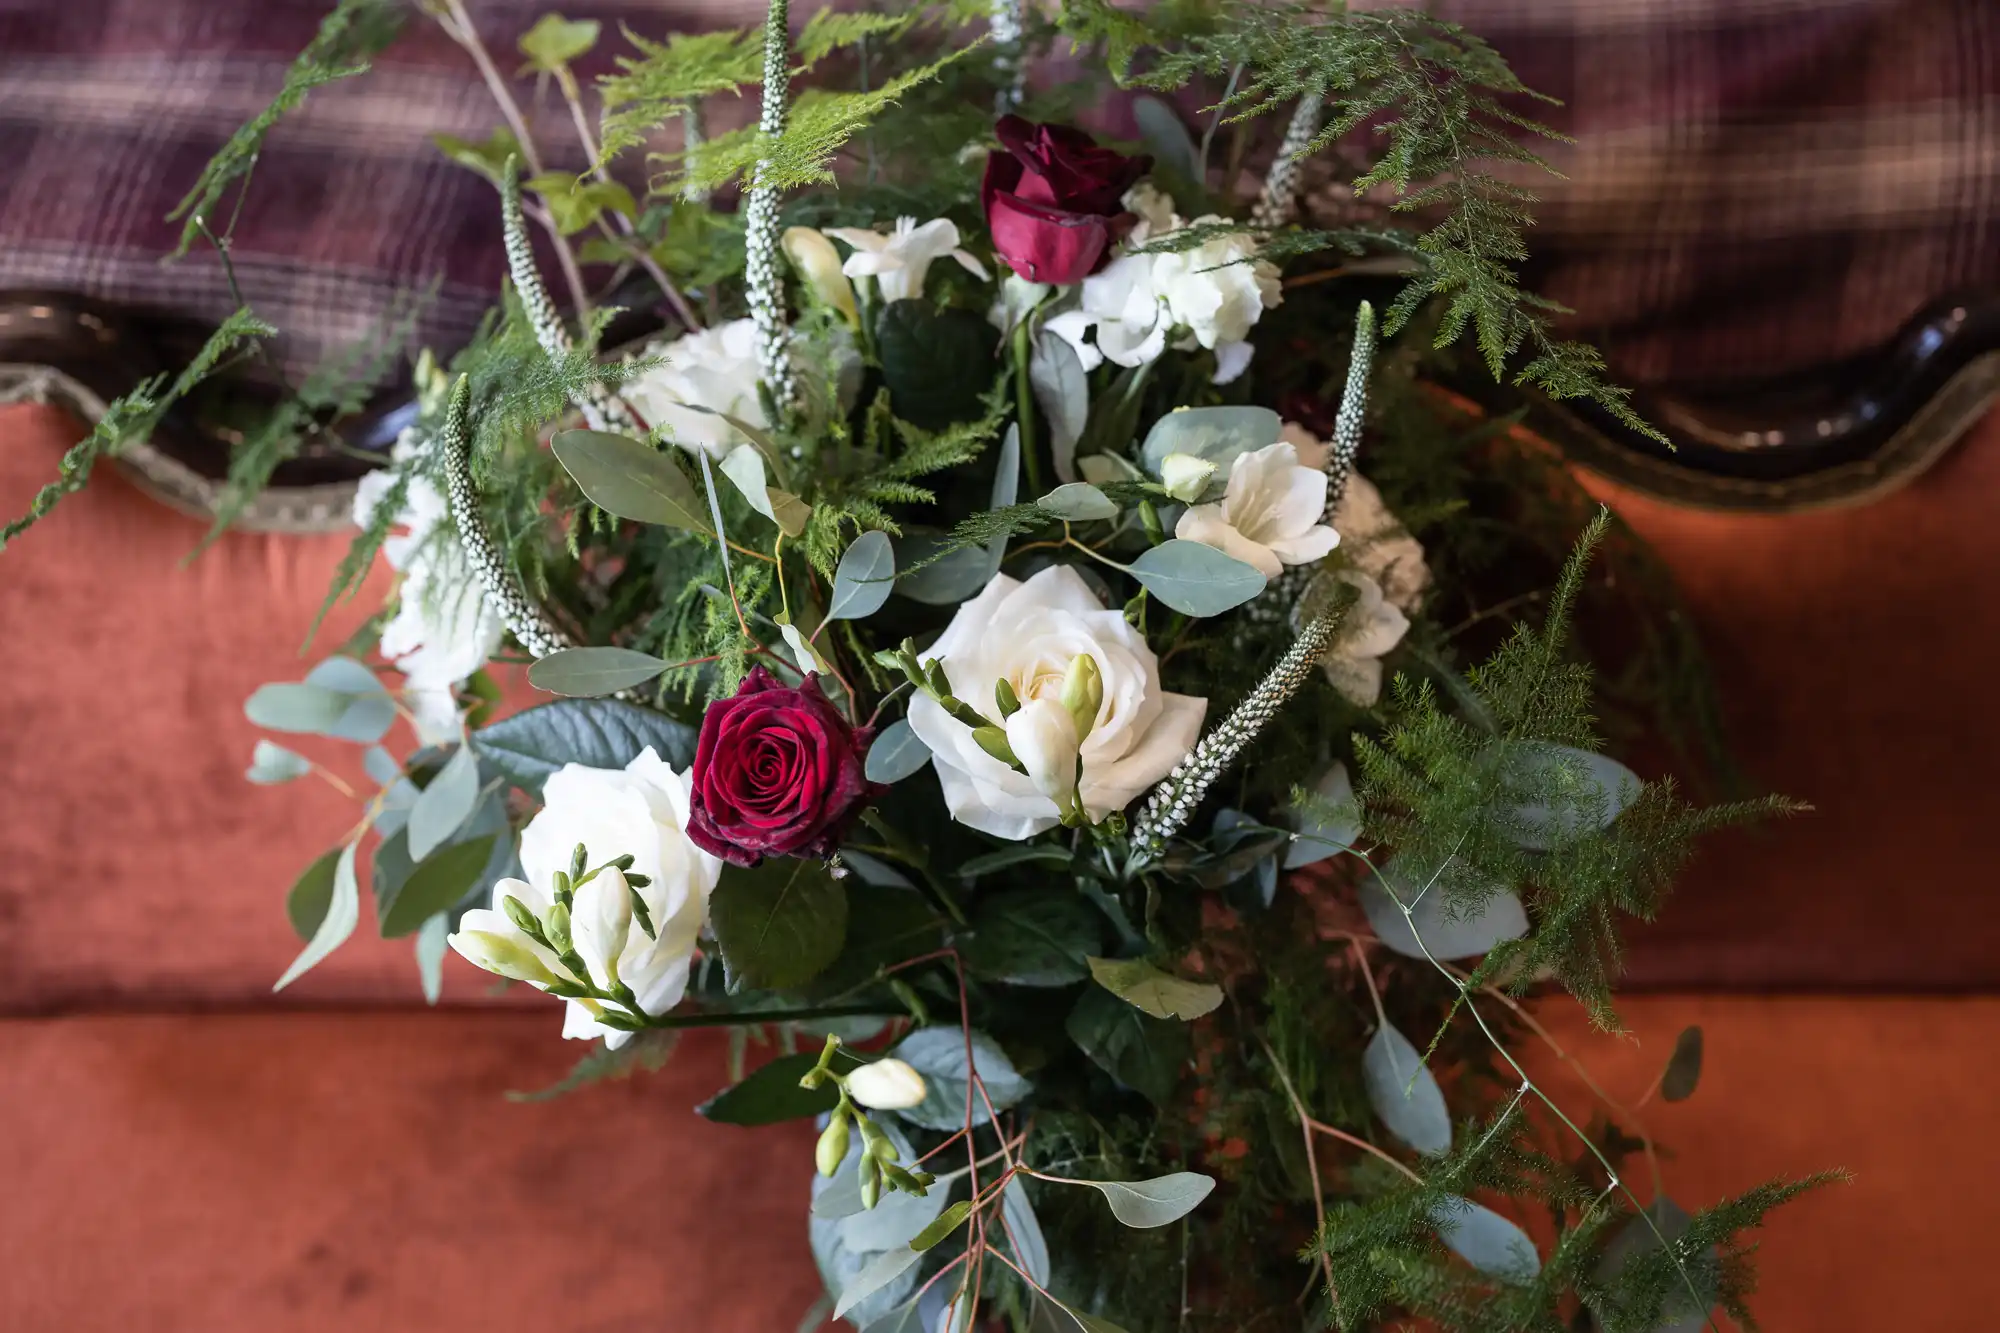 A close-up of a floral arrangement featuring white roses, dark red roses, and various greenery on a plaid fabric background.